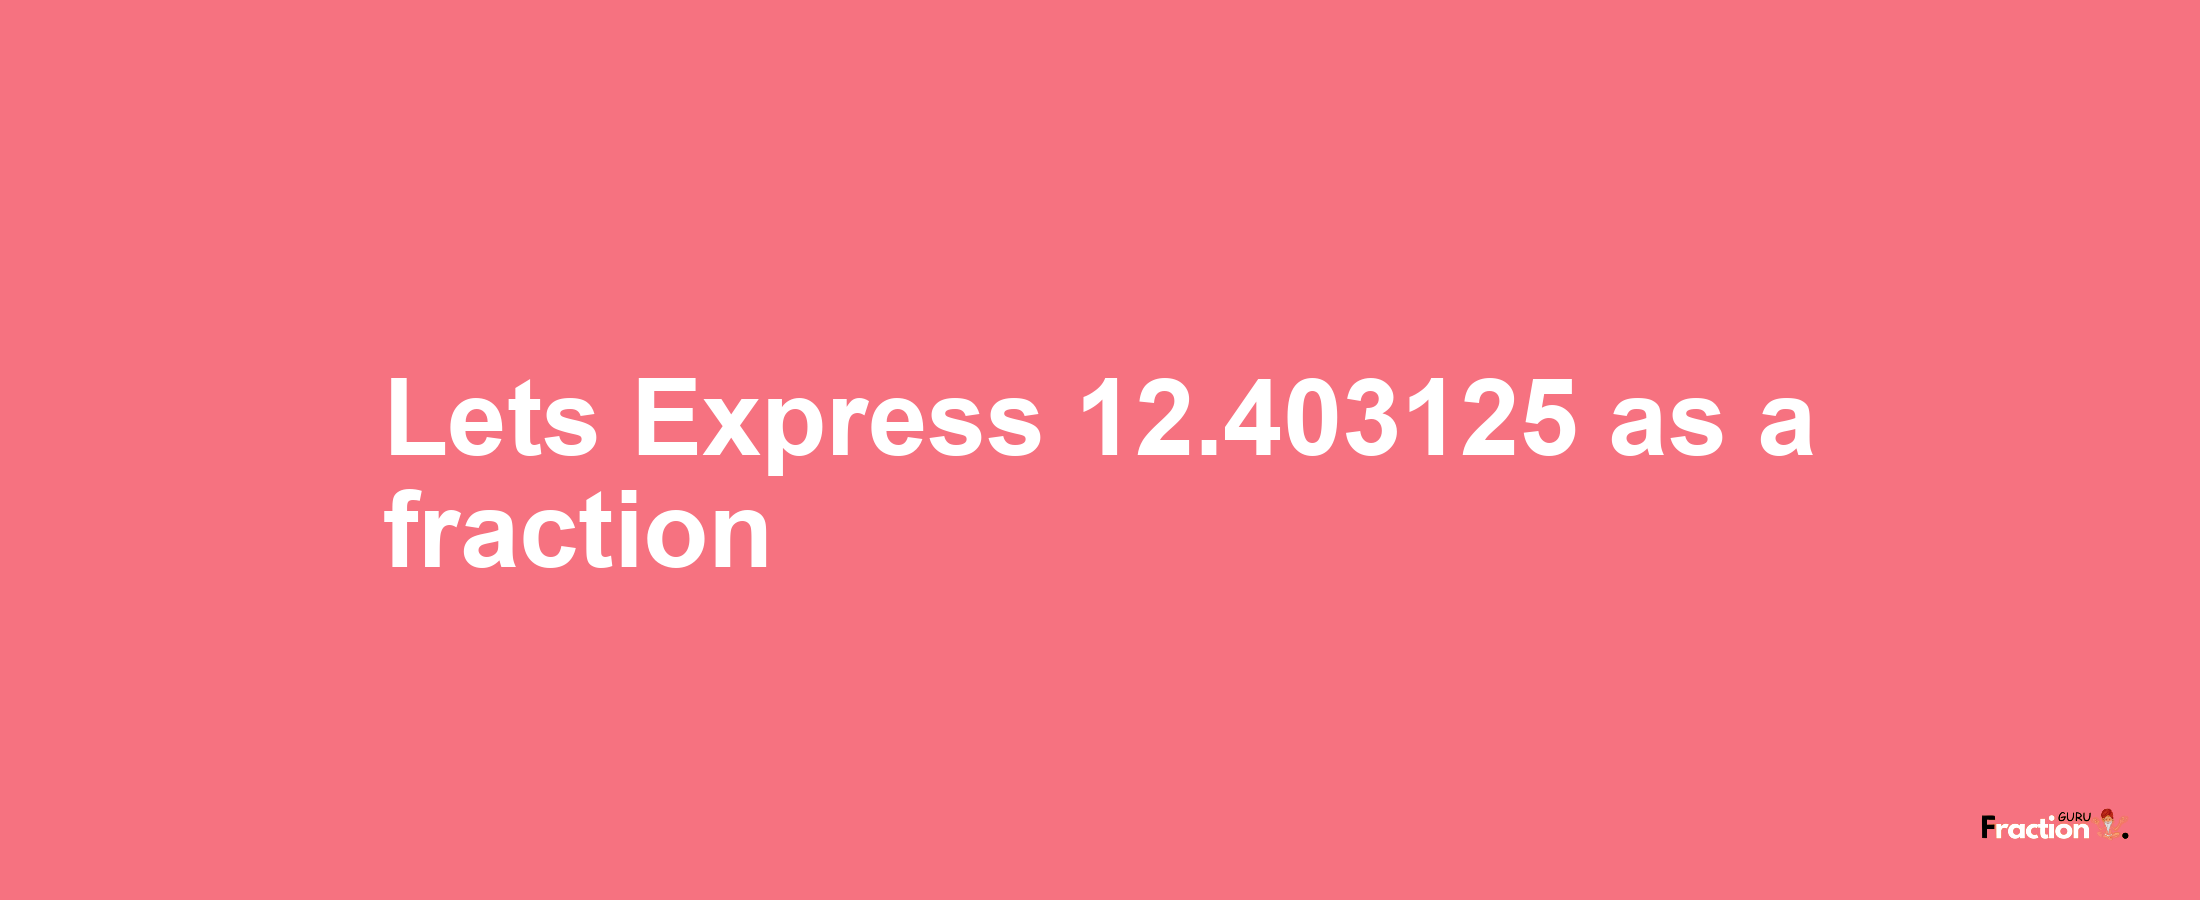 Lets Express 12.403125 as afraction